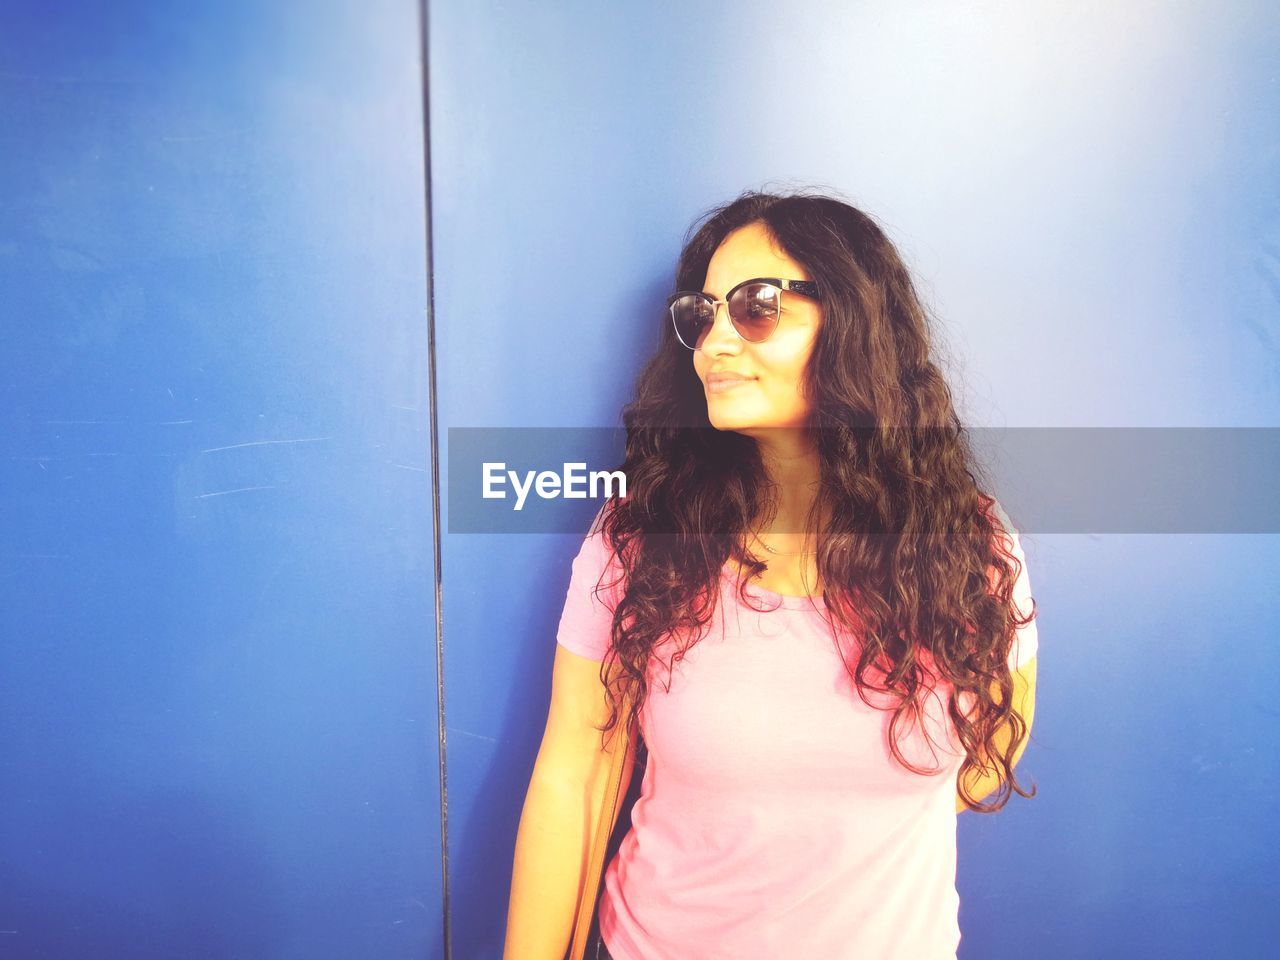 long hair, fashion, one person, hairstyle, blue, young adult, sunglasses, adult, women, glasses, red, portrait, copy space, brown hair, photo shoot, waist up, casual clothing, standing, singing, arts culture and entertainment, lifestyles, smiling, cool attitude, nature, looking at camera, person, looking, curly hair, indoors, sunlight, happiness, emotion, teenager, female, architecture